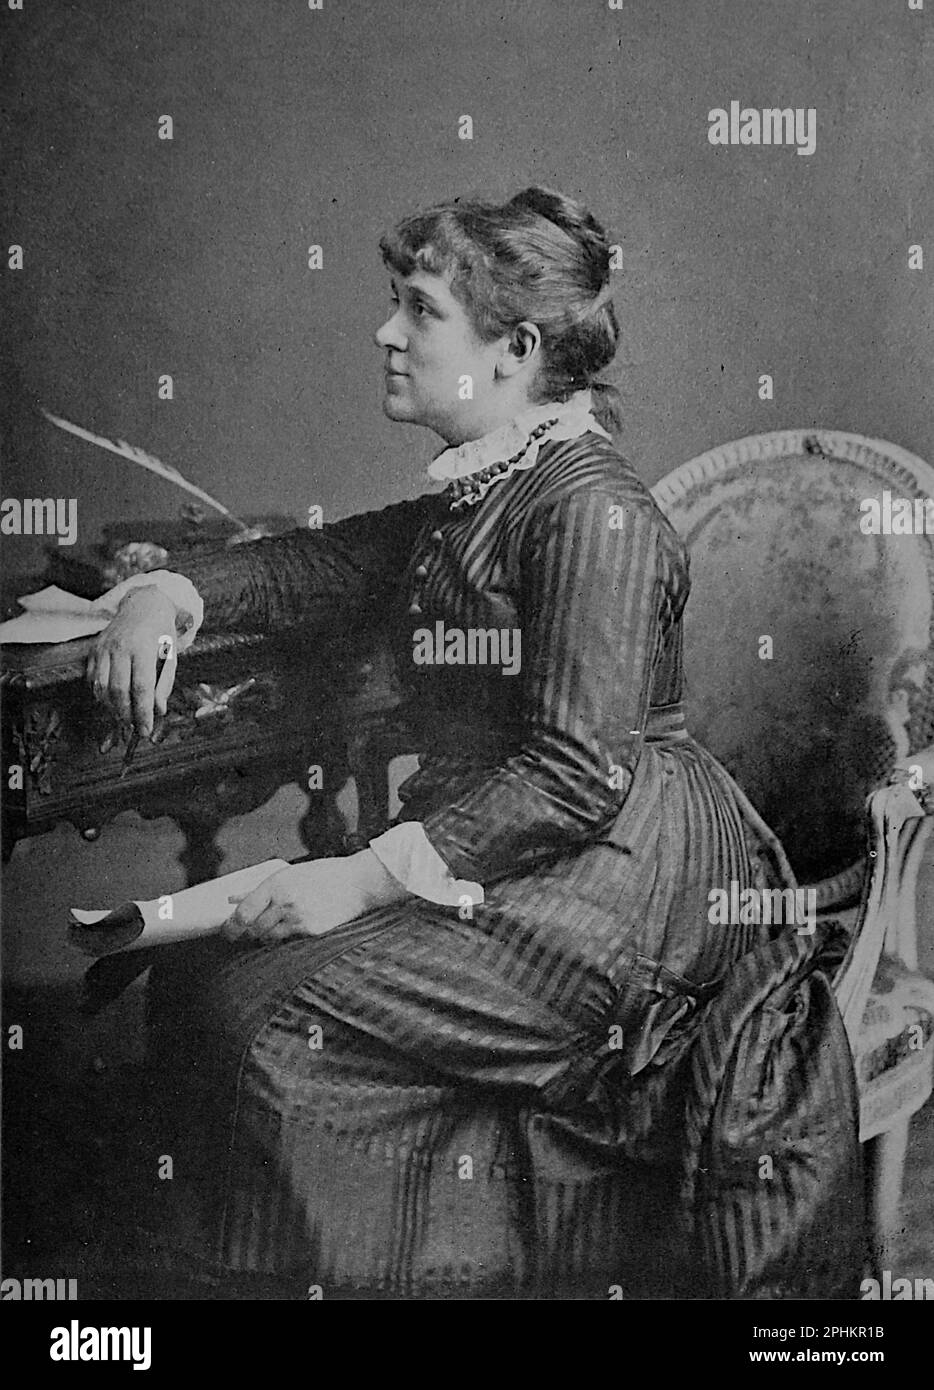 Kate Greenaway, 1880 photograph from the book Kate Greenaway by M.H. Spielmann and G.S. Layard. Published by Adam and Charles, 1905. Stock Photo